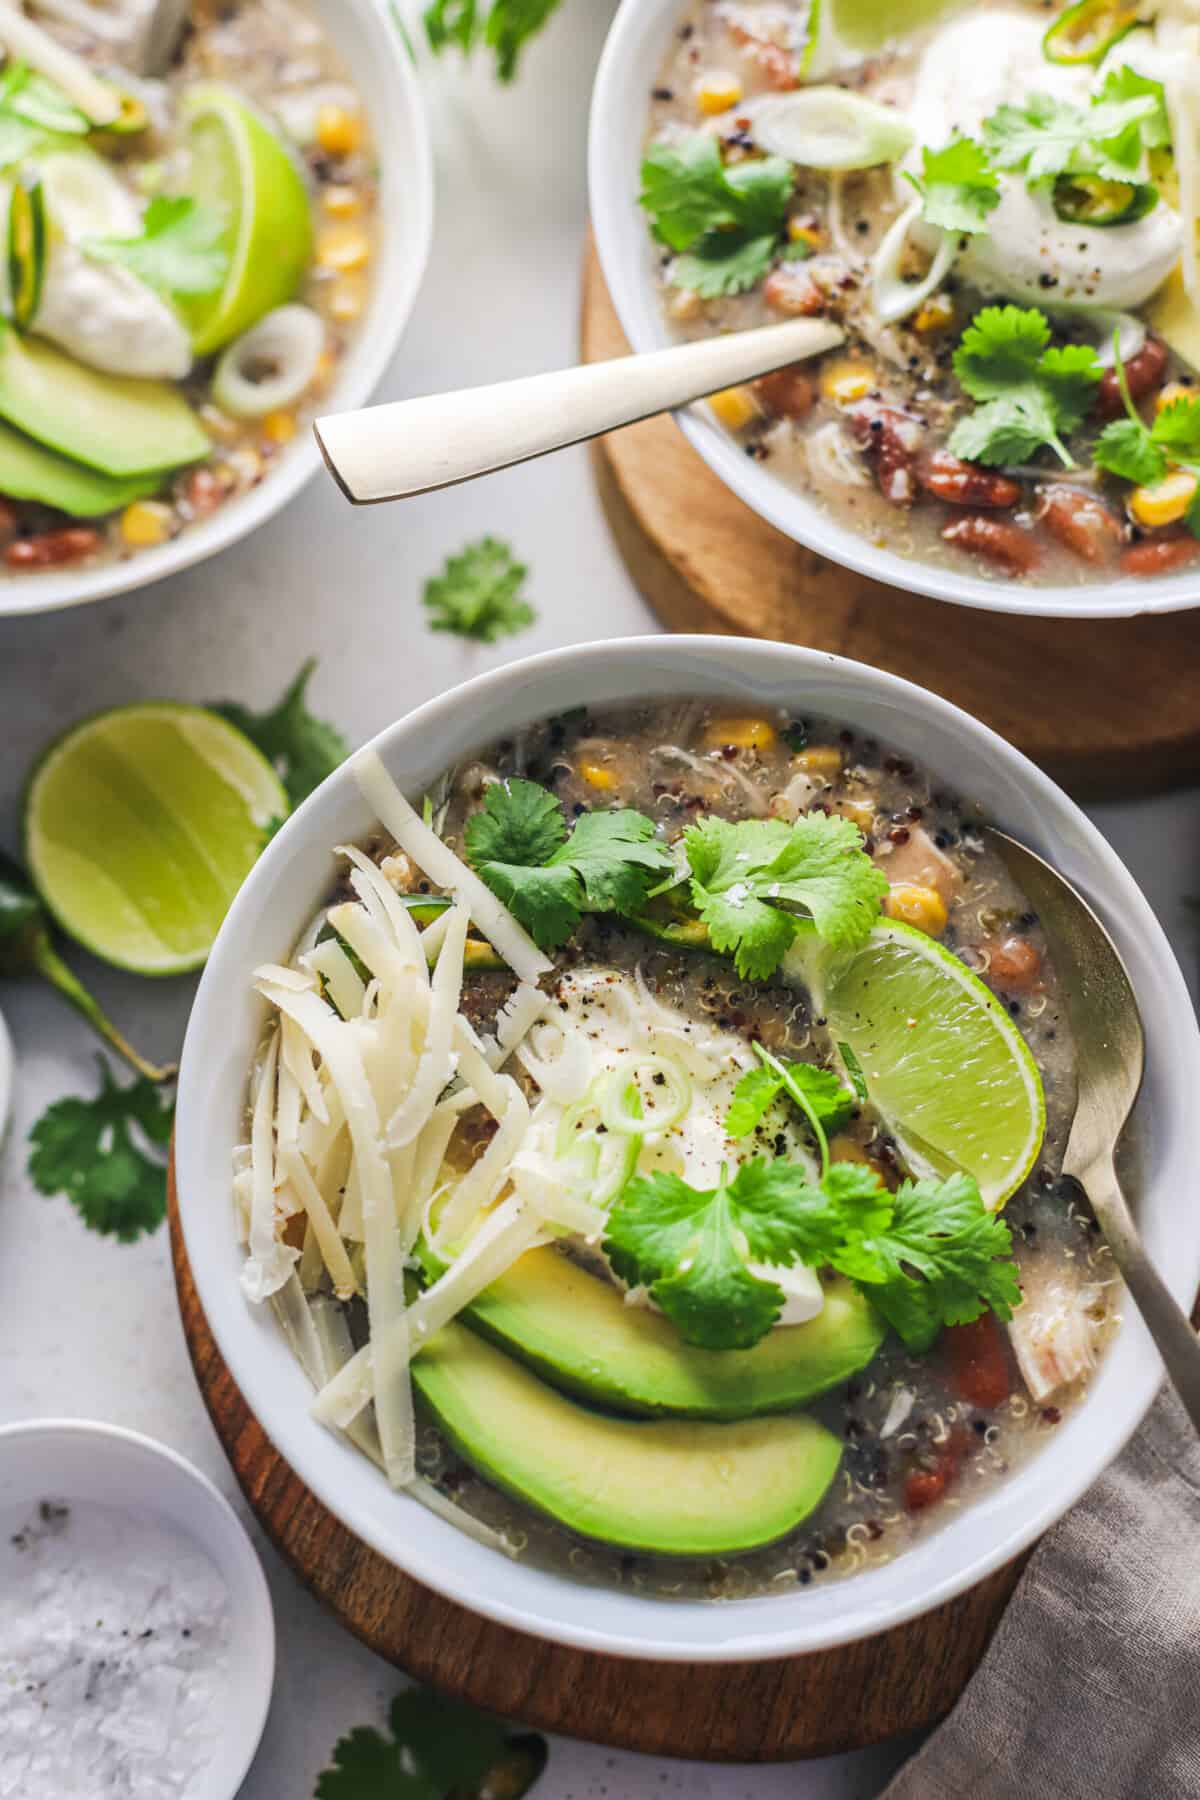 A bowl of chili garnished with avocado slices, shredded cheese, herbs and a lime wedge.